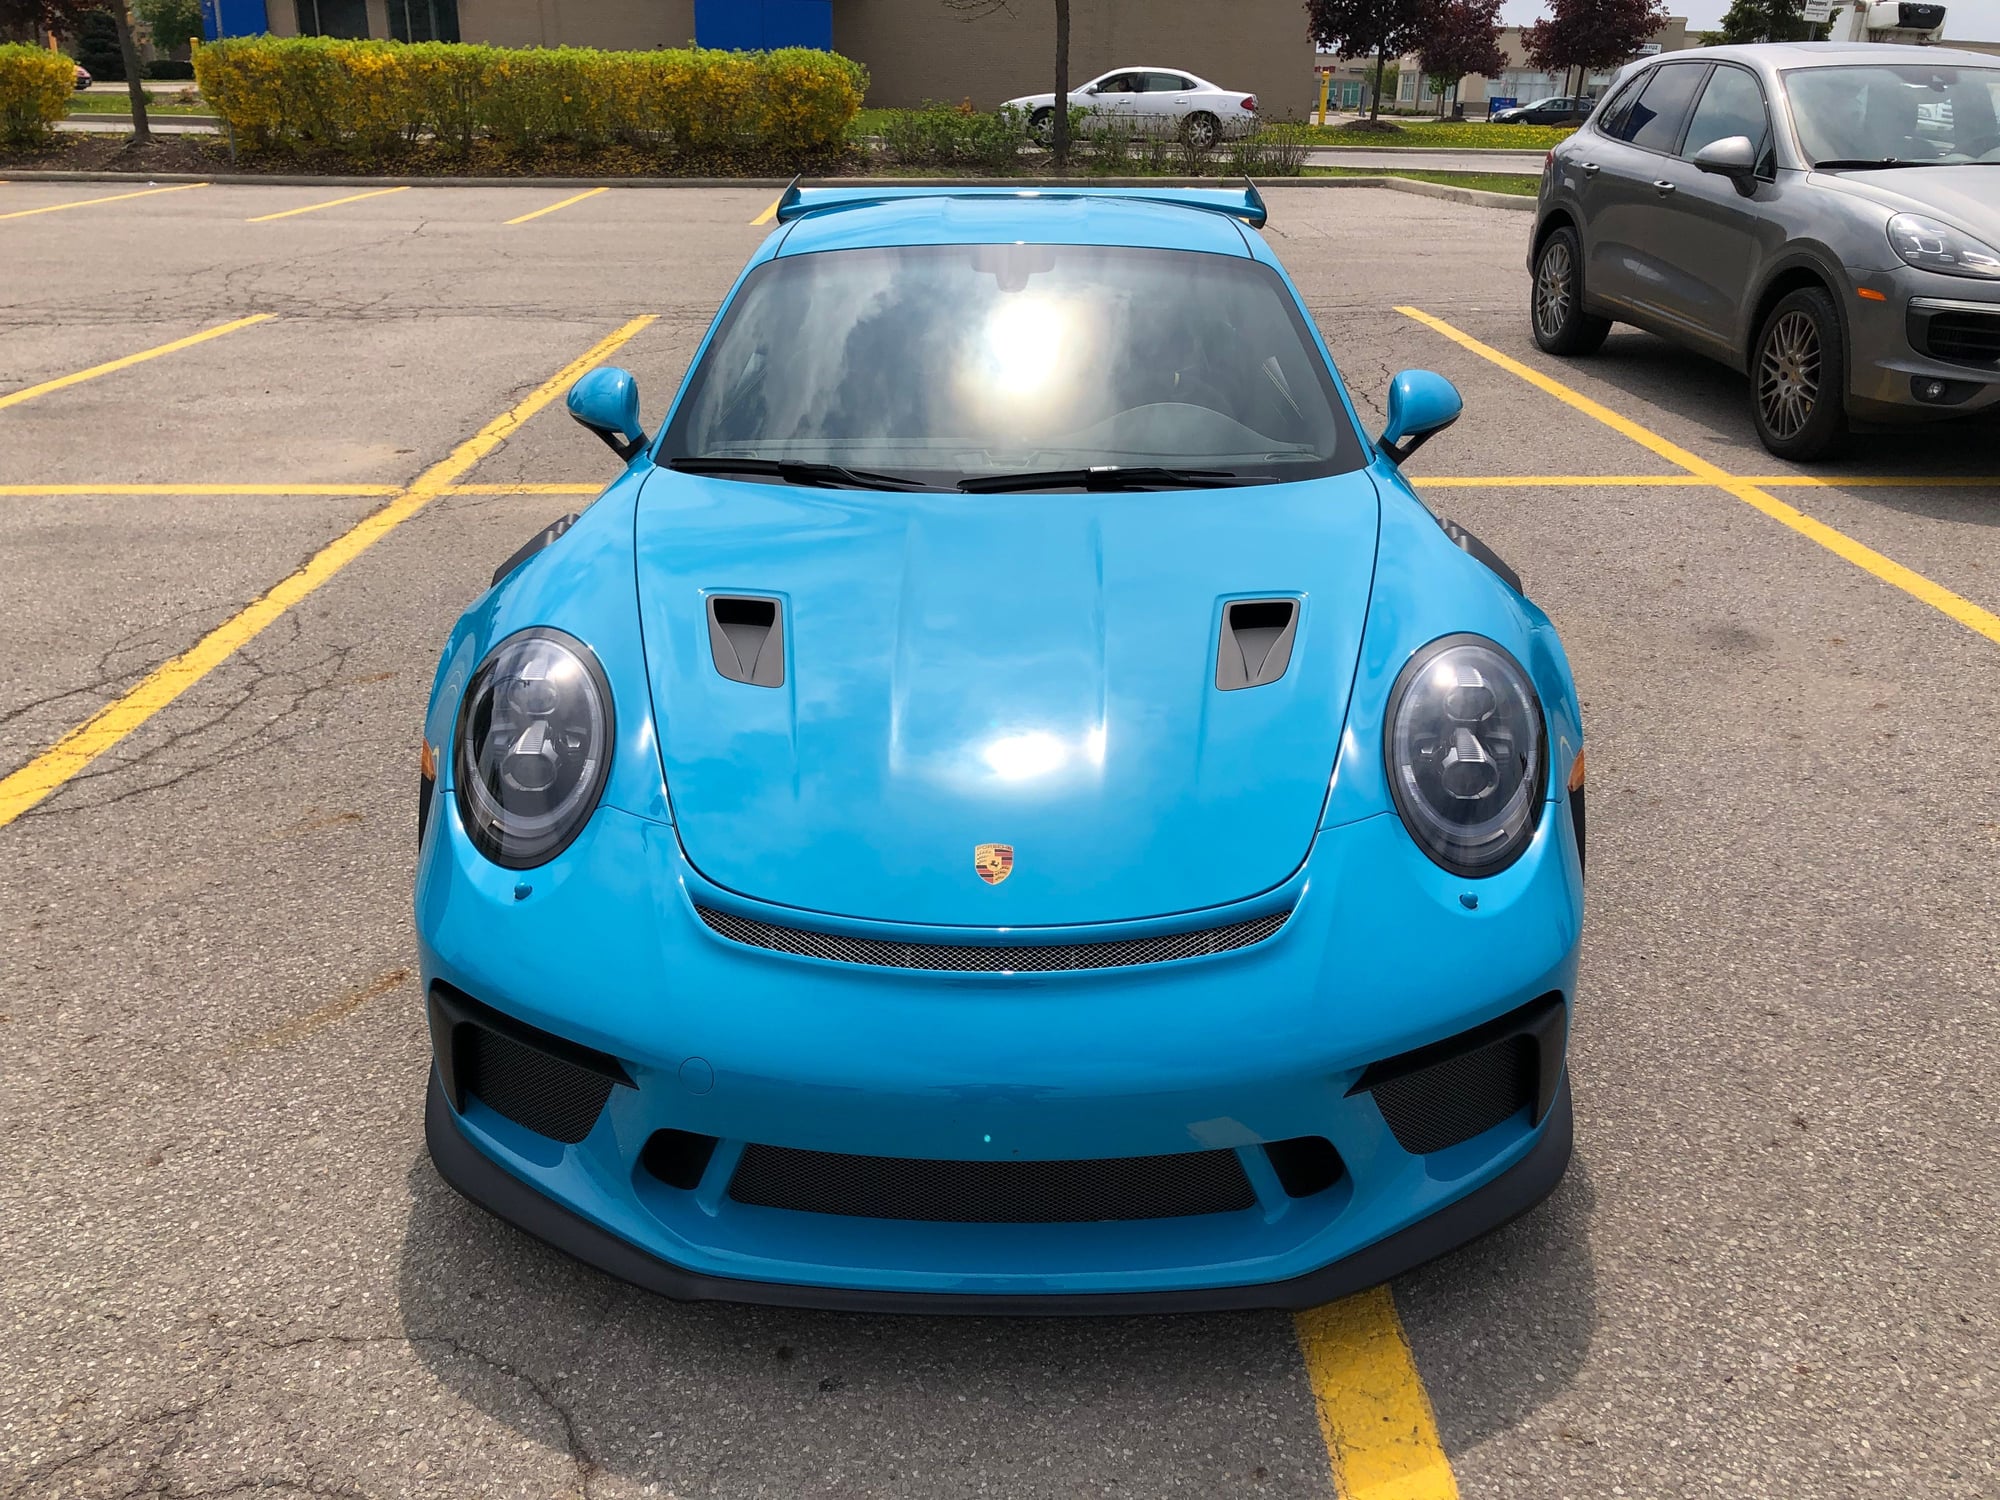 2019 Porsche GT3 - FS: 2019 911 GT3RS Miami Blue - New - VIN WP0AF2A97KS166776 - 100 Miles - 6 cyl - 2WD - Automatic - Coupe - Blue - Toronto, ON M5A1V2, Canada